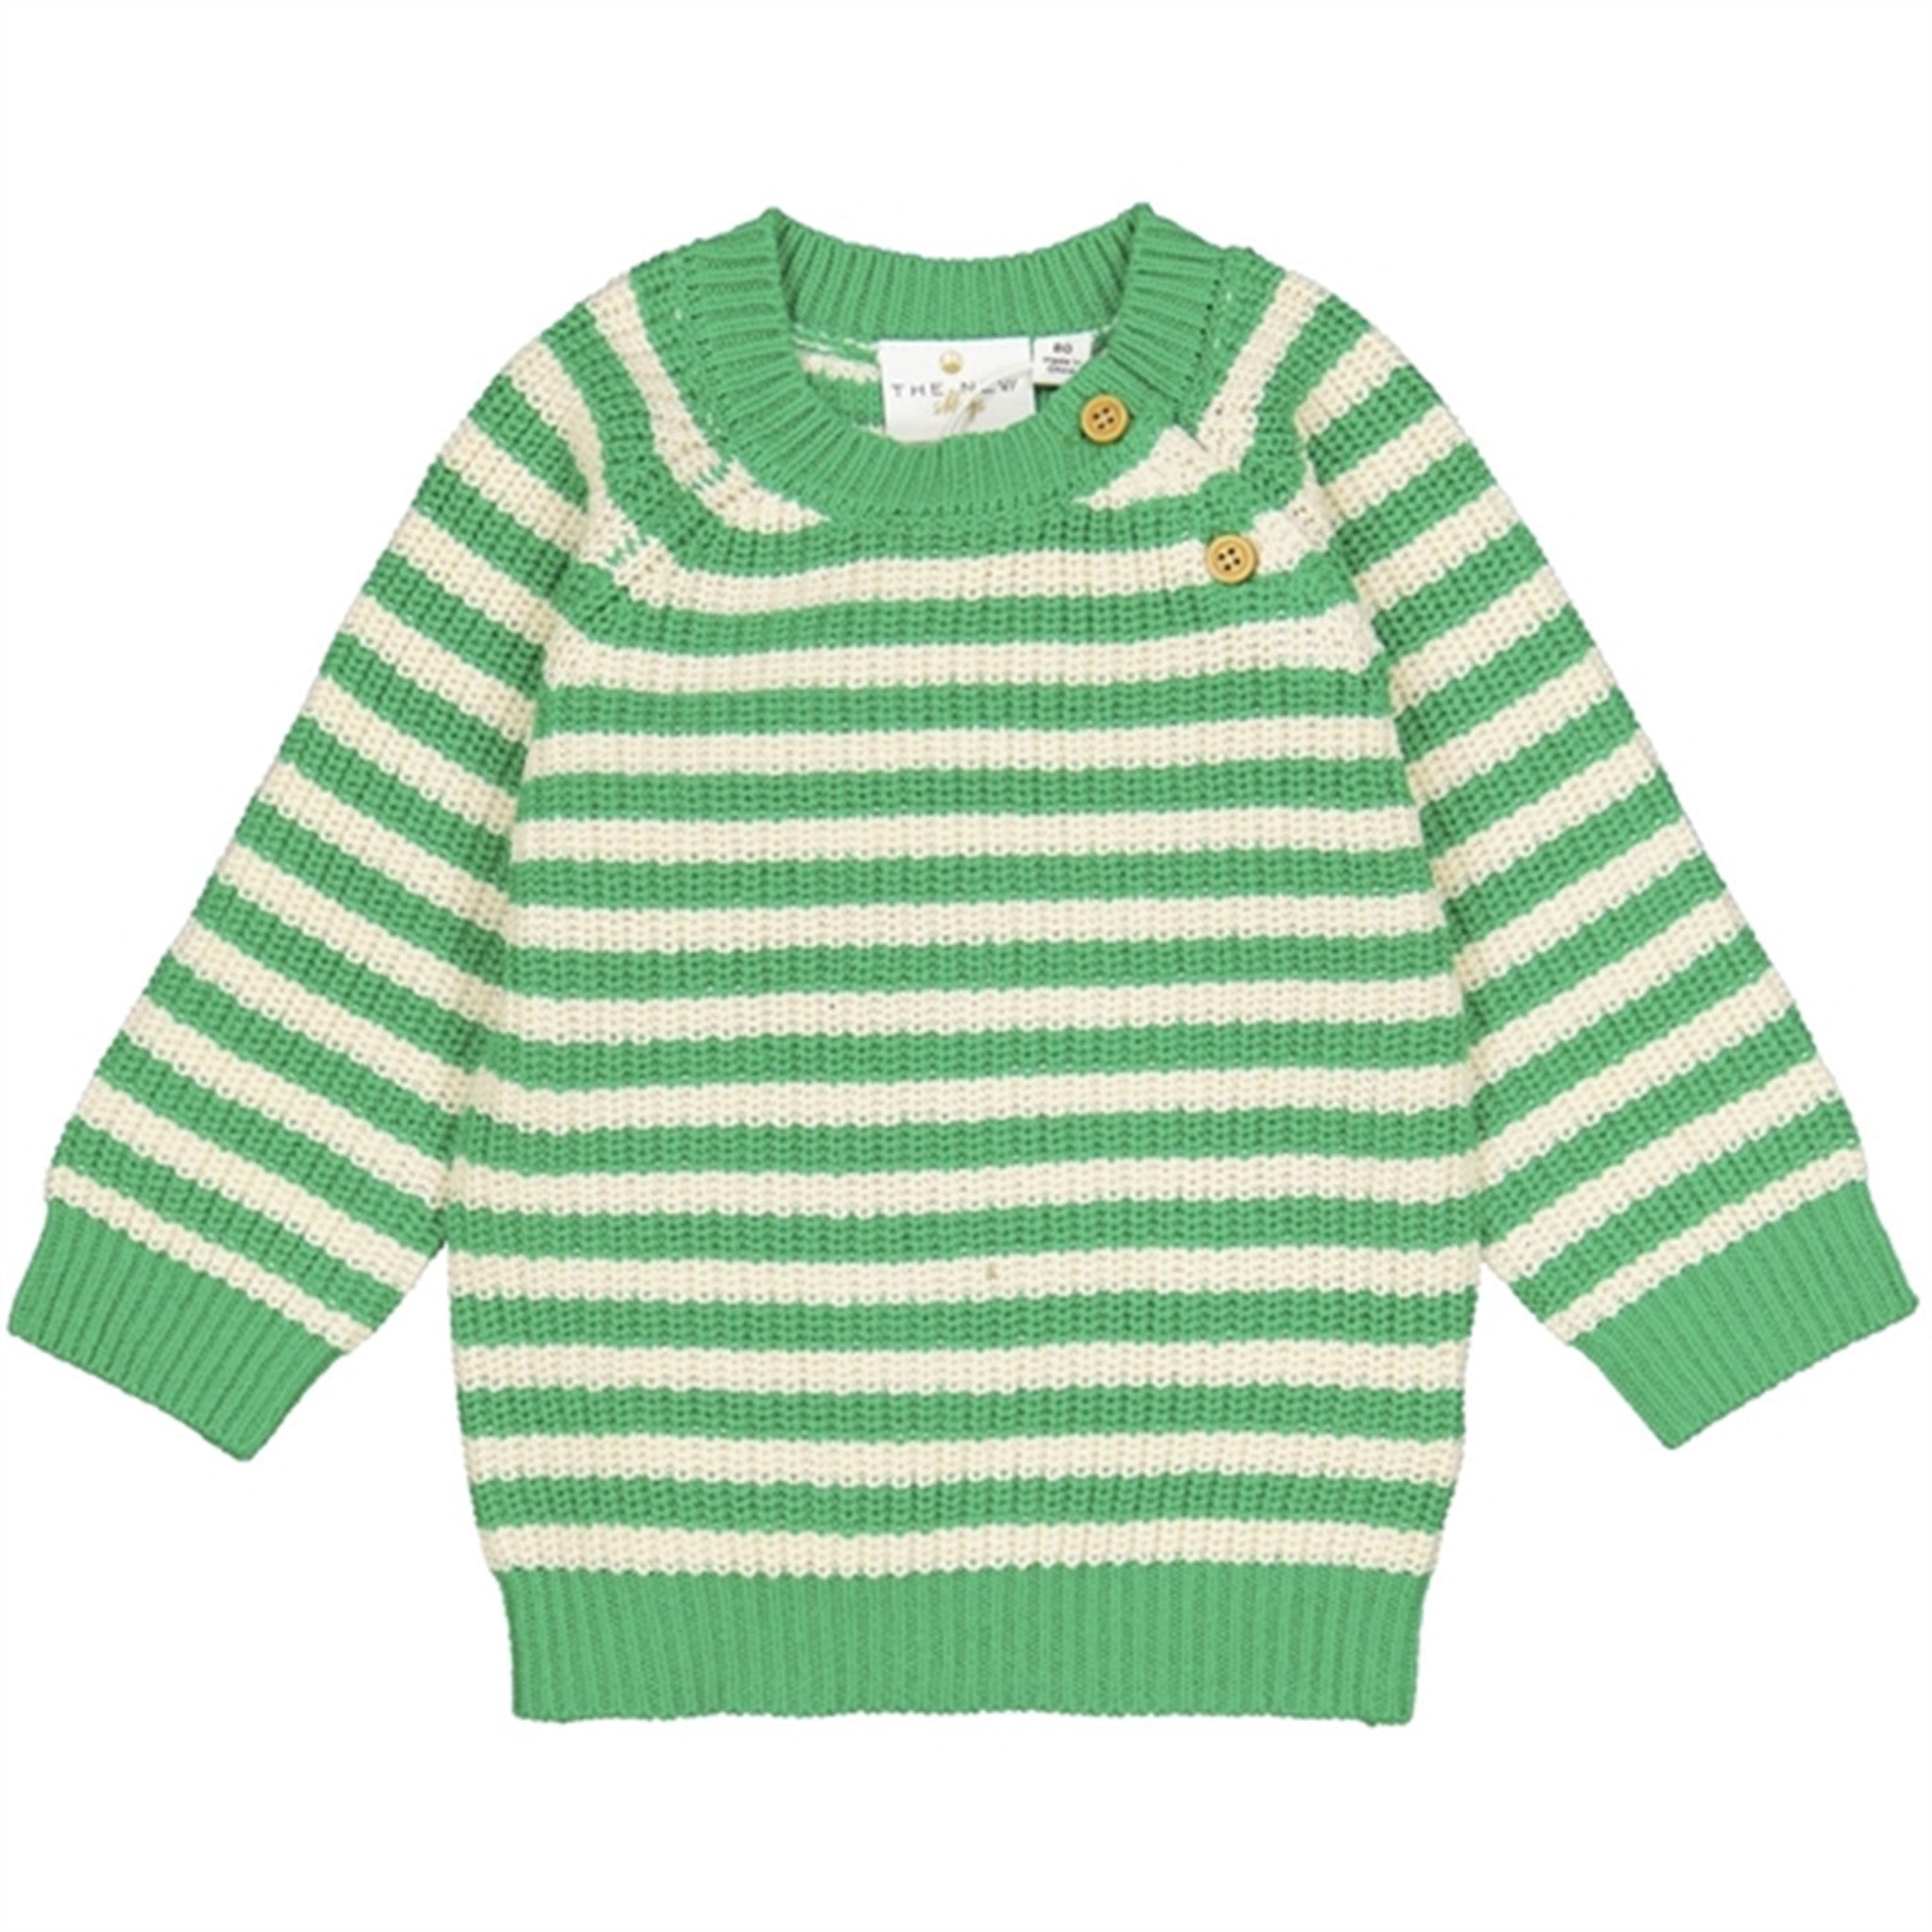 THE NEW Siblings Bright Green Ilfred Knit Pullover